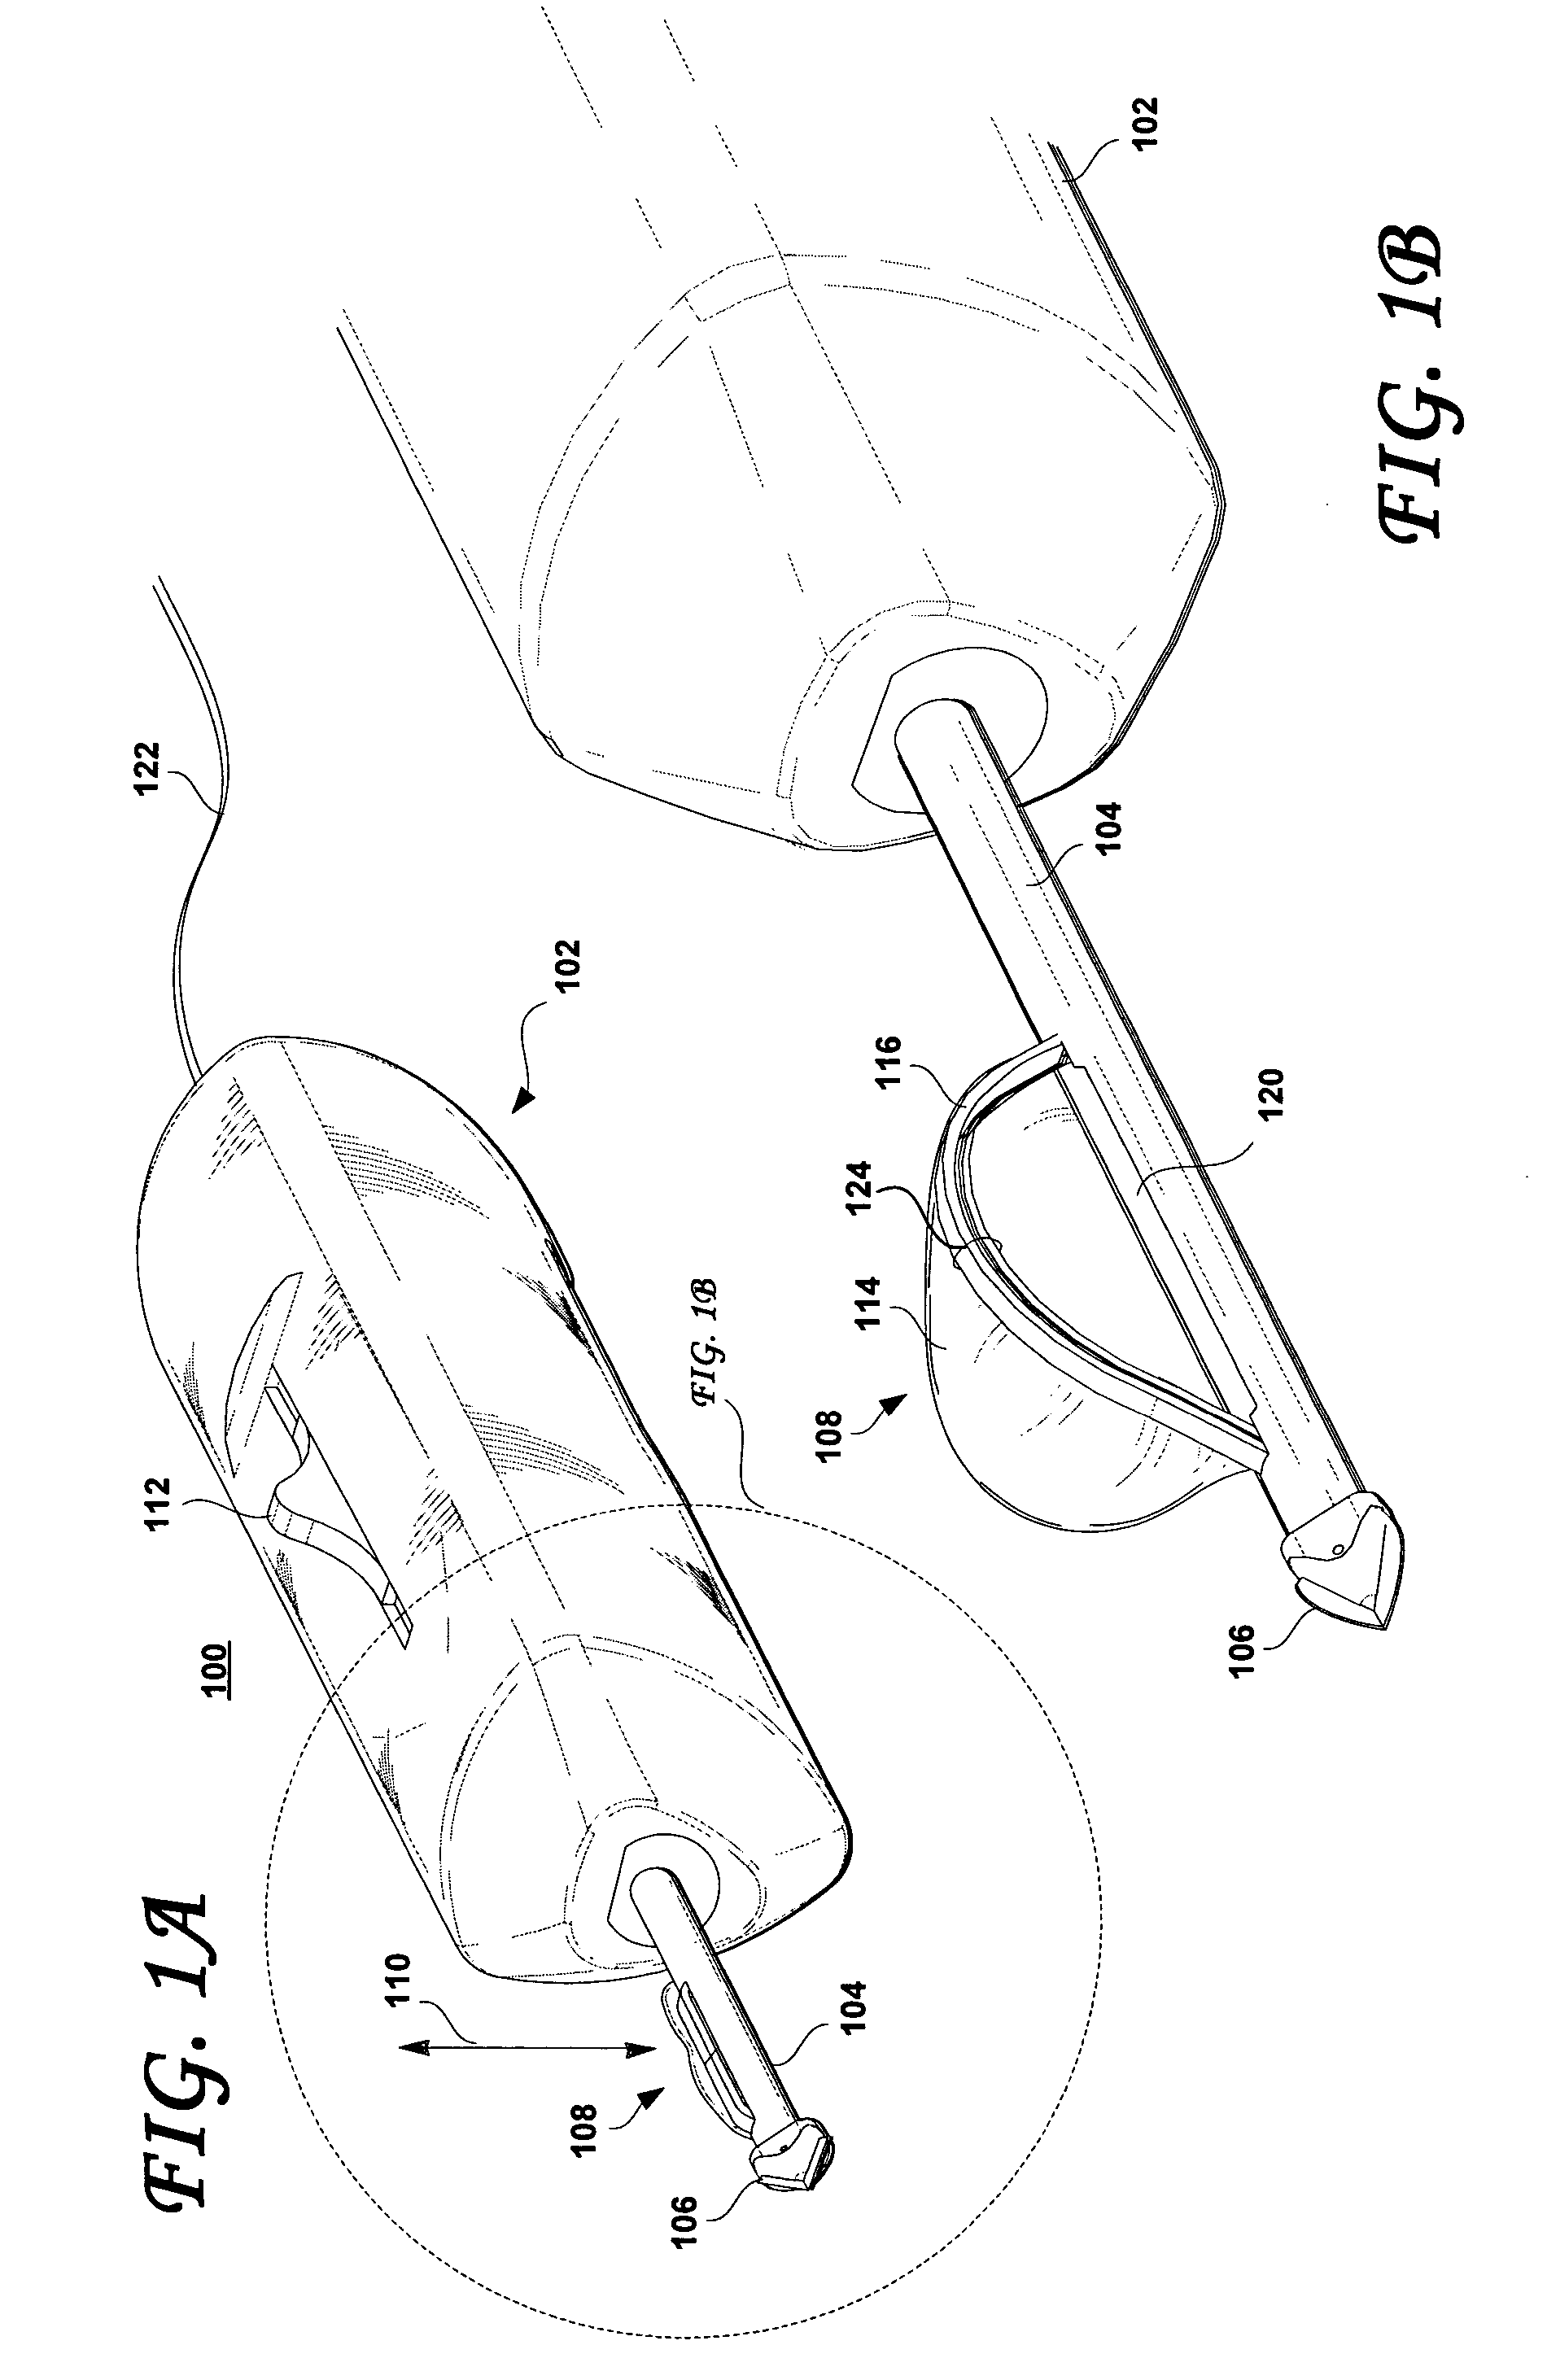 Methods and devices for cutting and collecting soft tissue